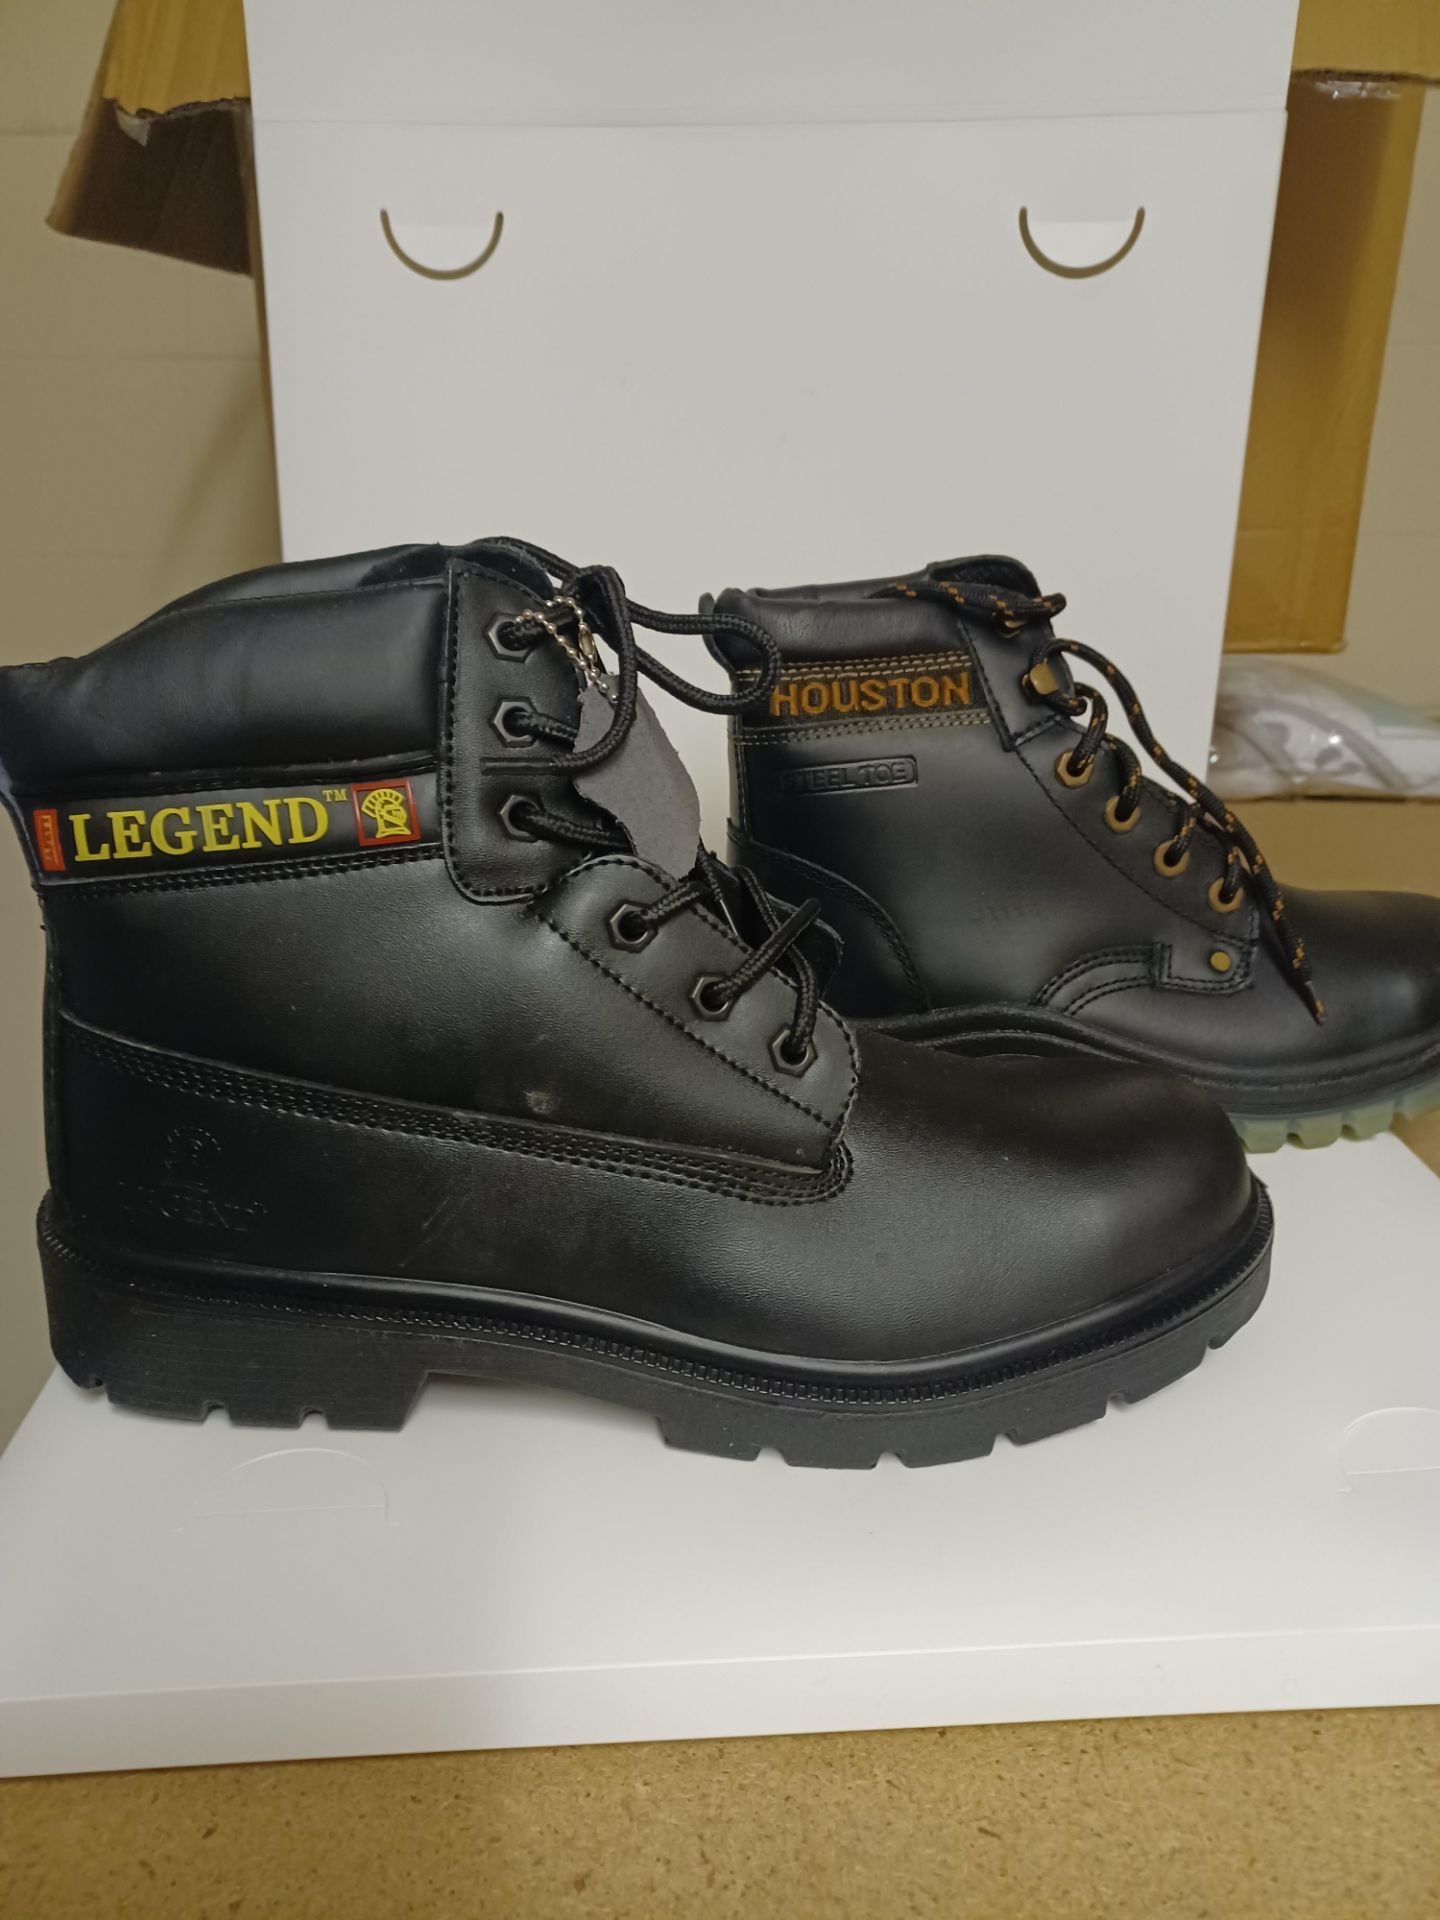 3 X MIXED BRAND NEW SAFETY BOOTS STYLES MAY VARY RRP CIRCA £250.00 - AO